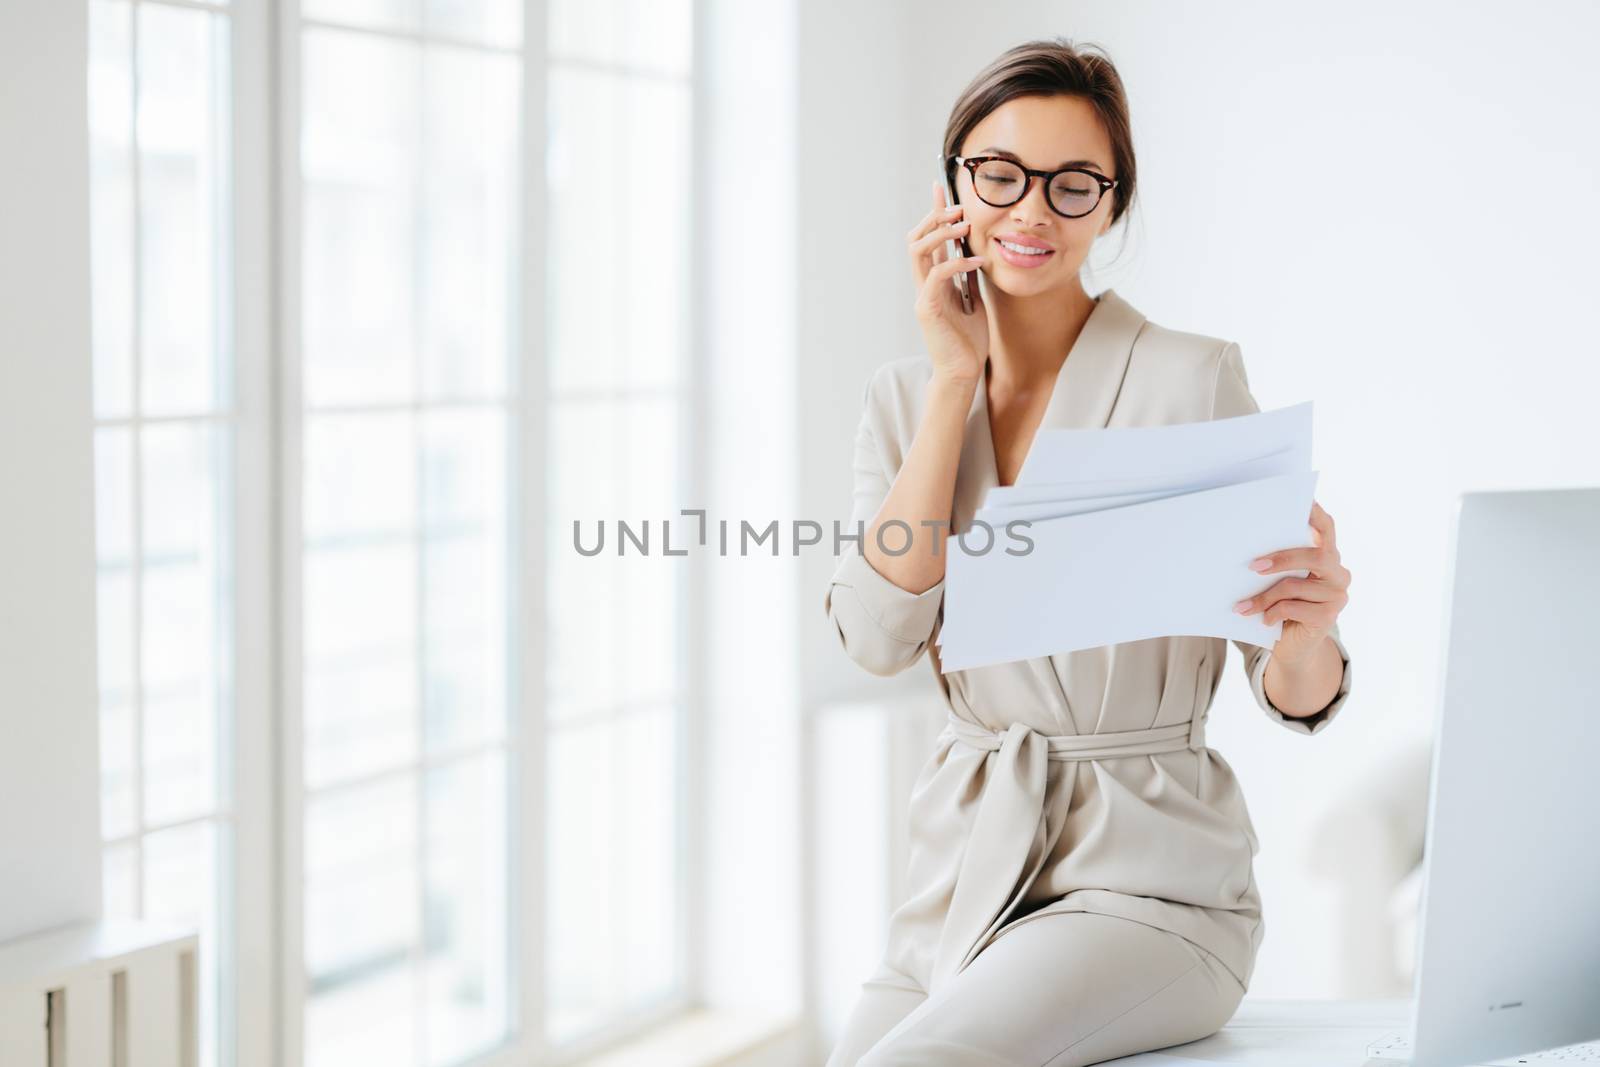 Attractive businesswoman reads papers or business documents, has telephone talk with business partner, examines paperwork before meeting, sits at desktop, smiles happily, works with documentation